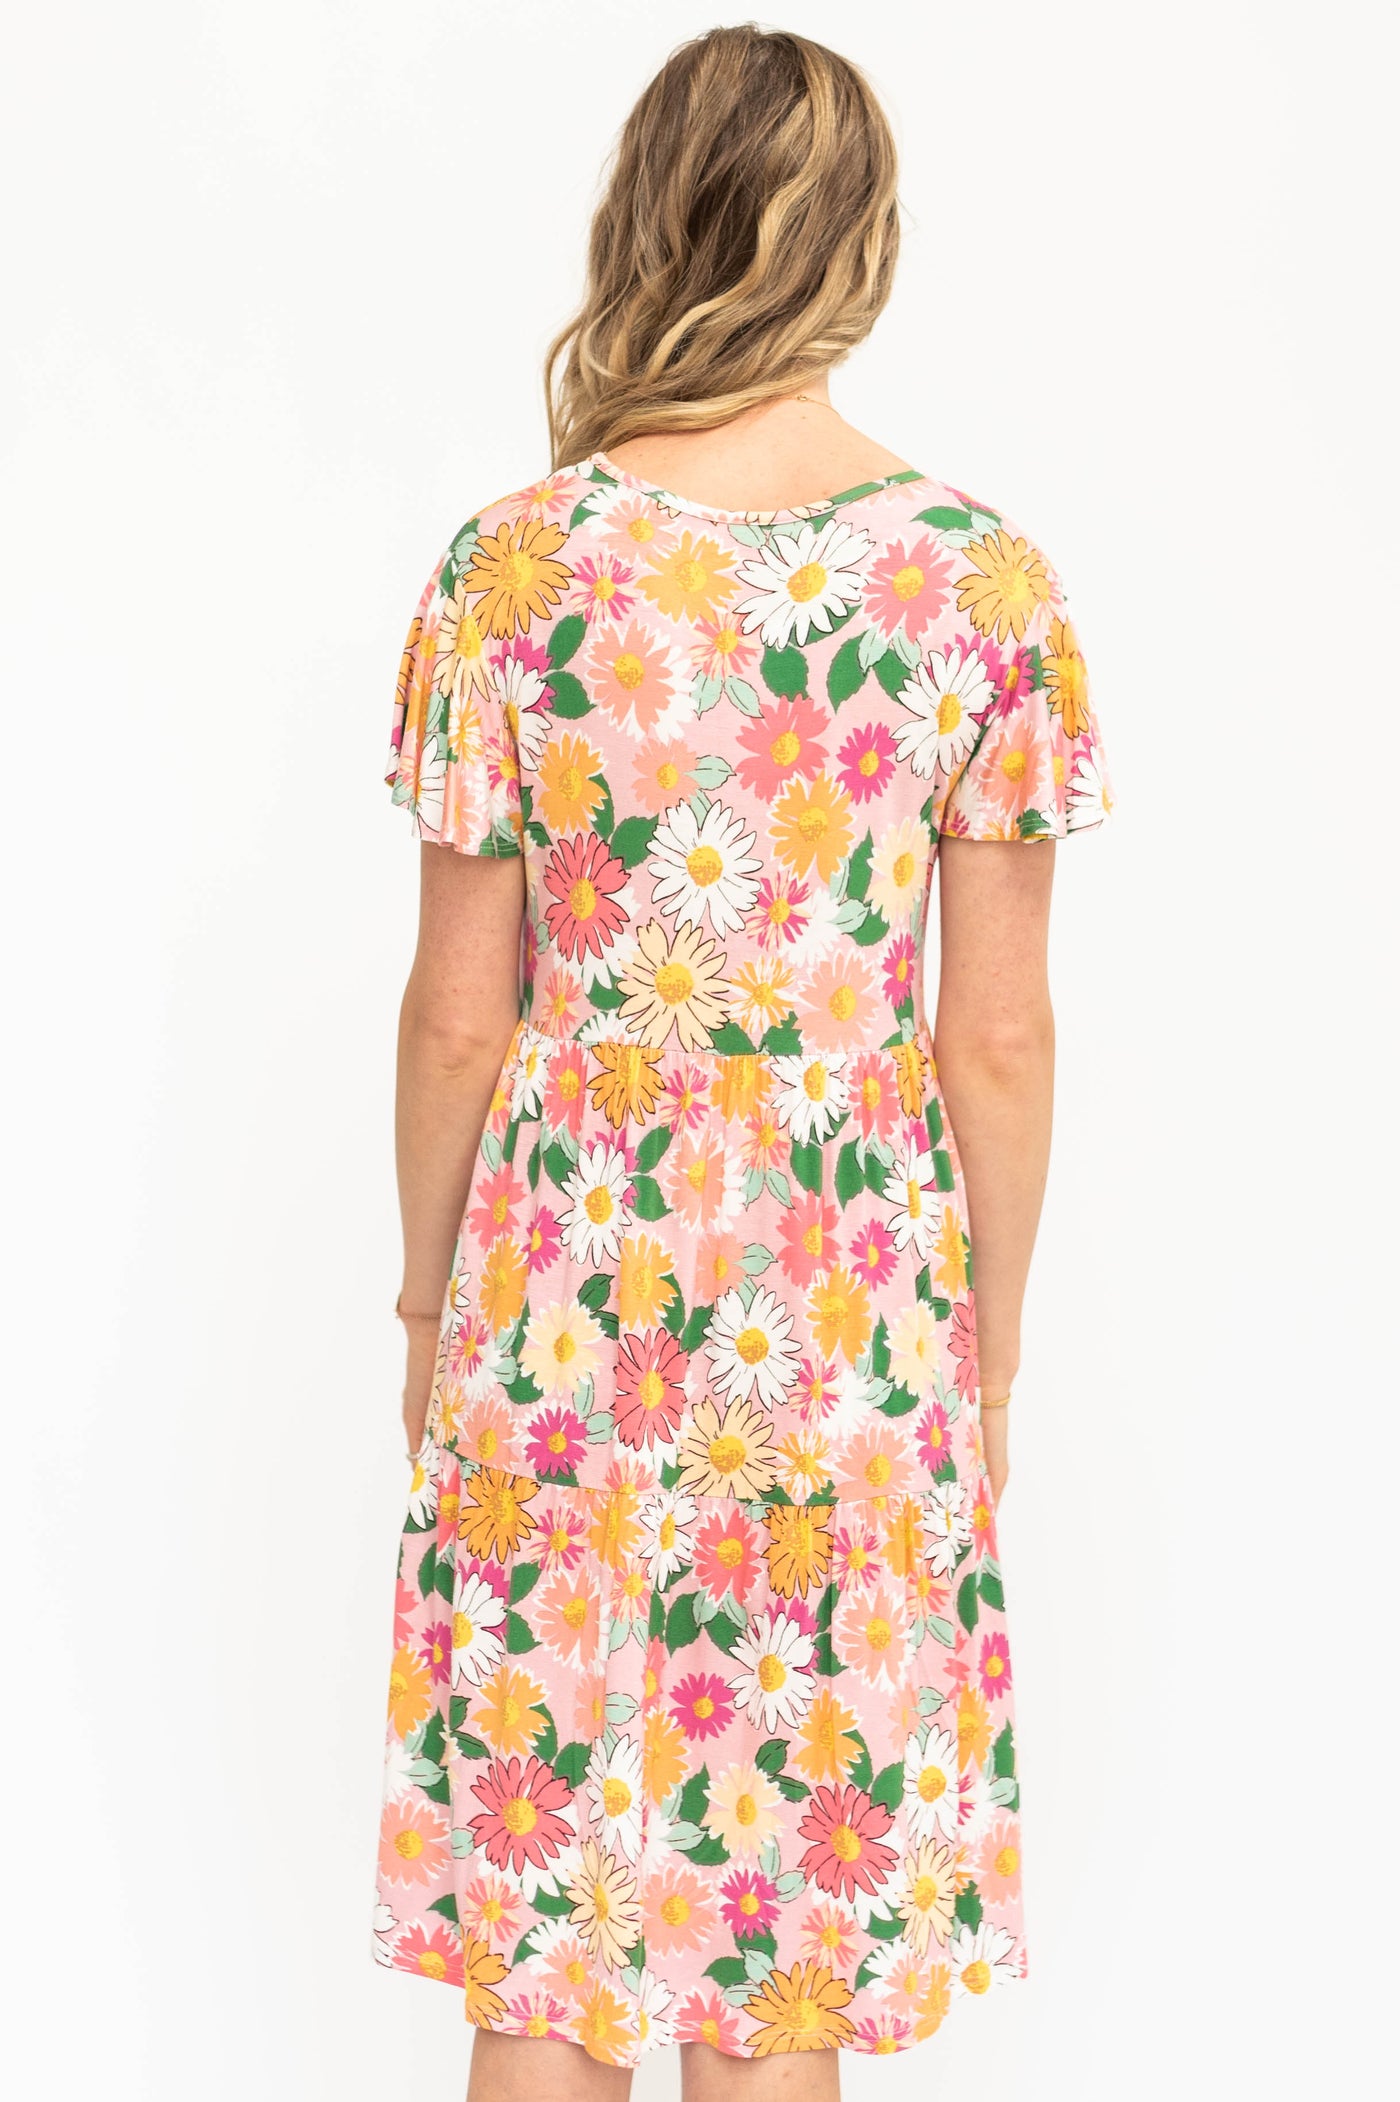 Back view pink floral dress